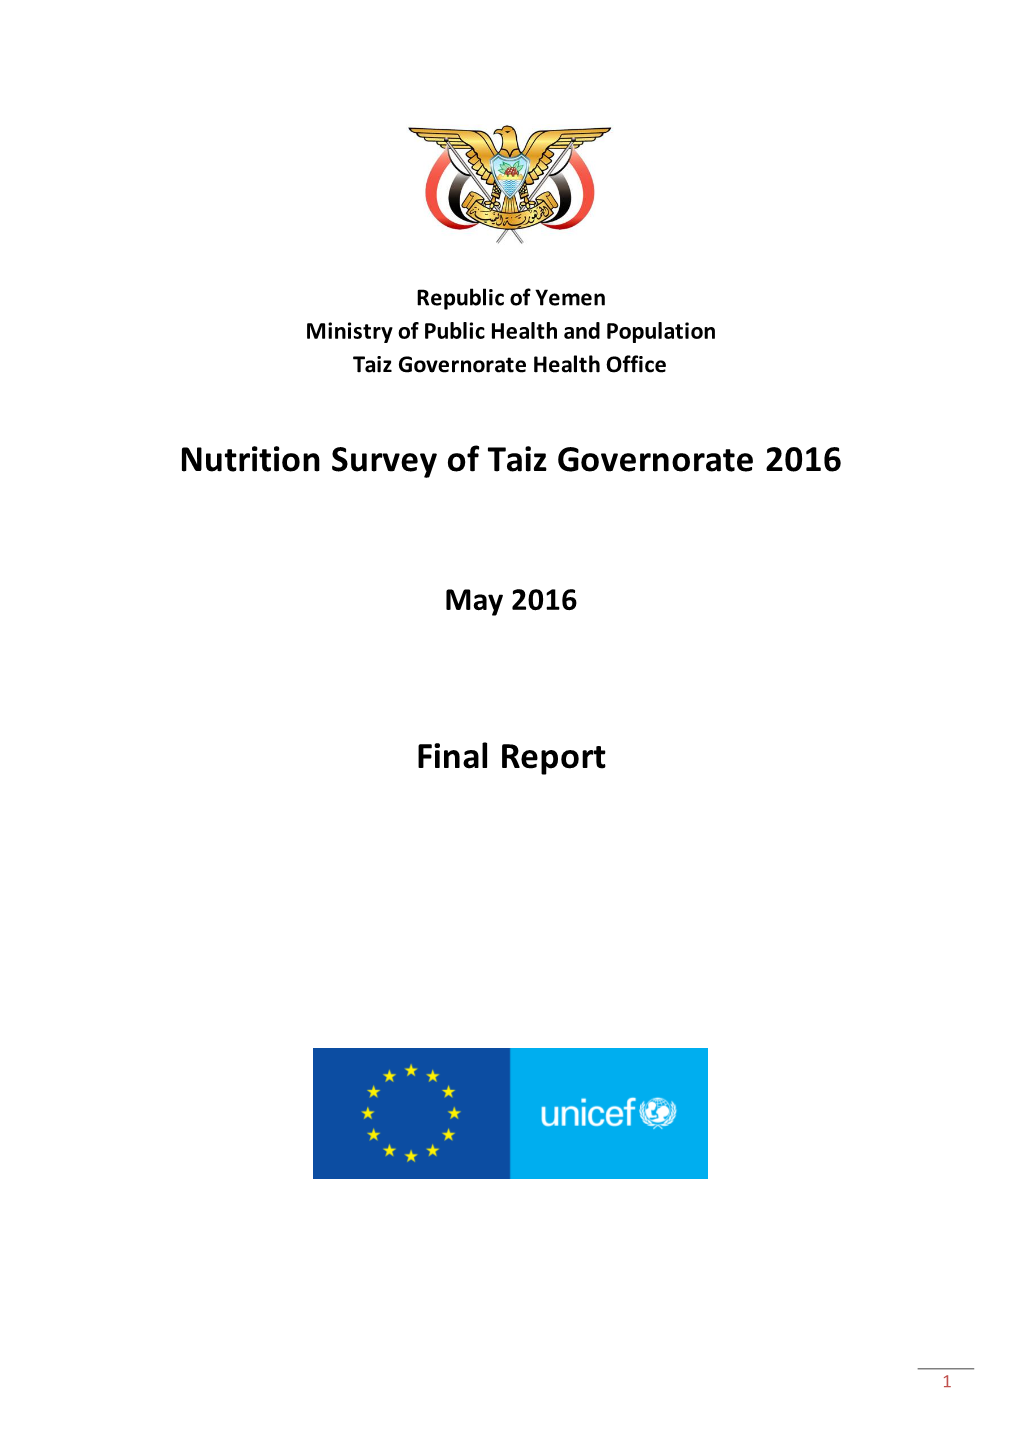 Nutrition Survey of Taiz Governorate 2016 Final Report